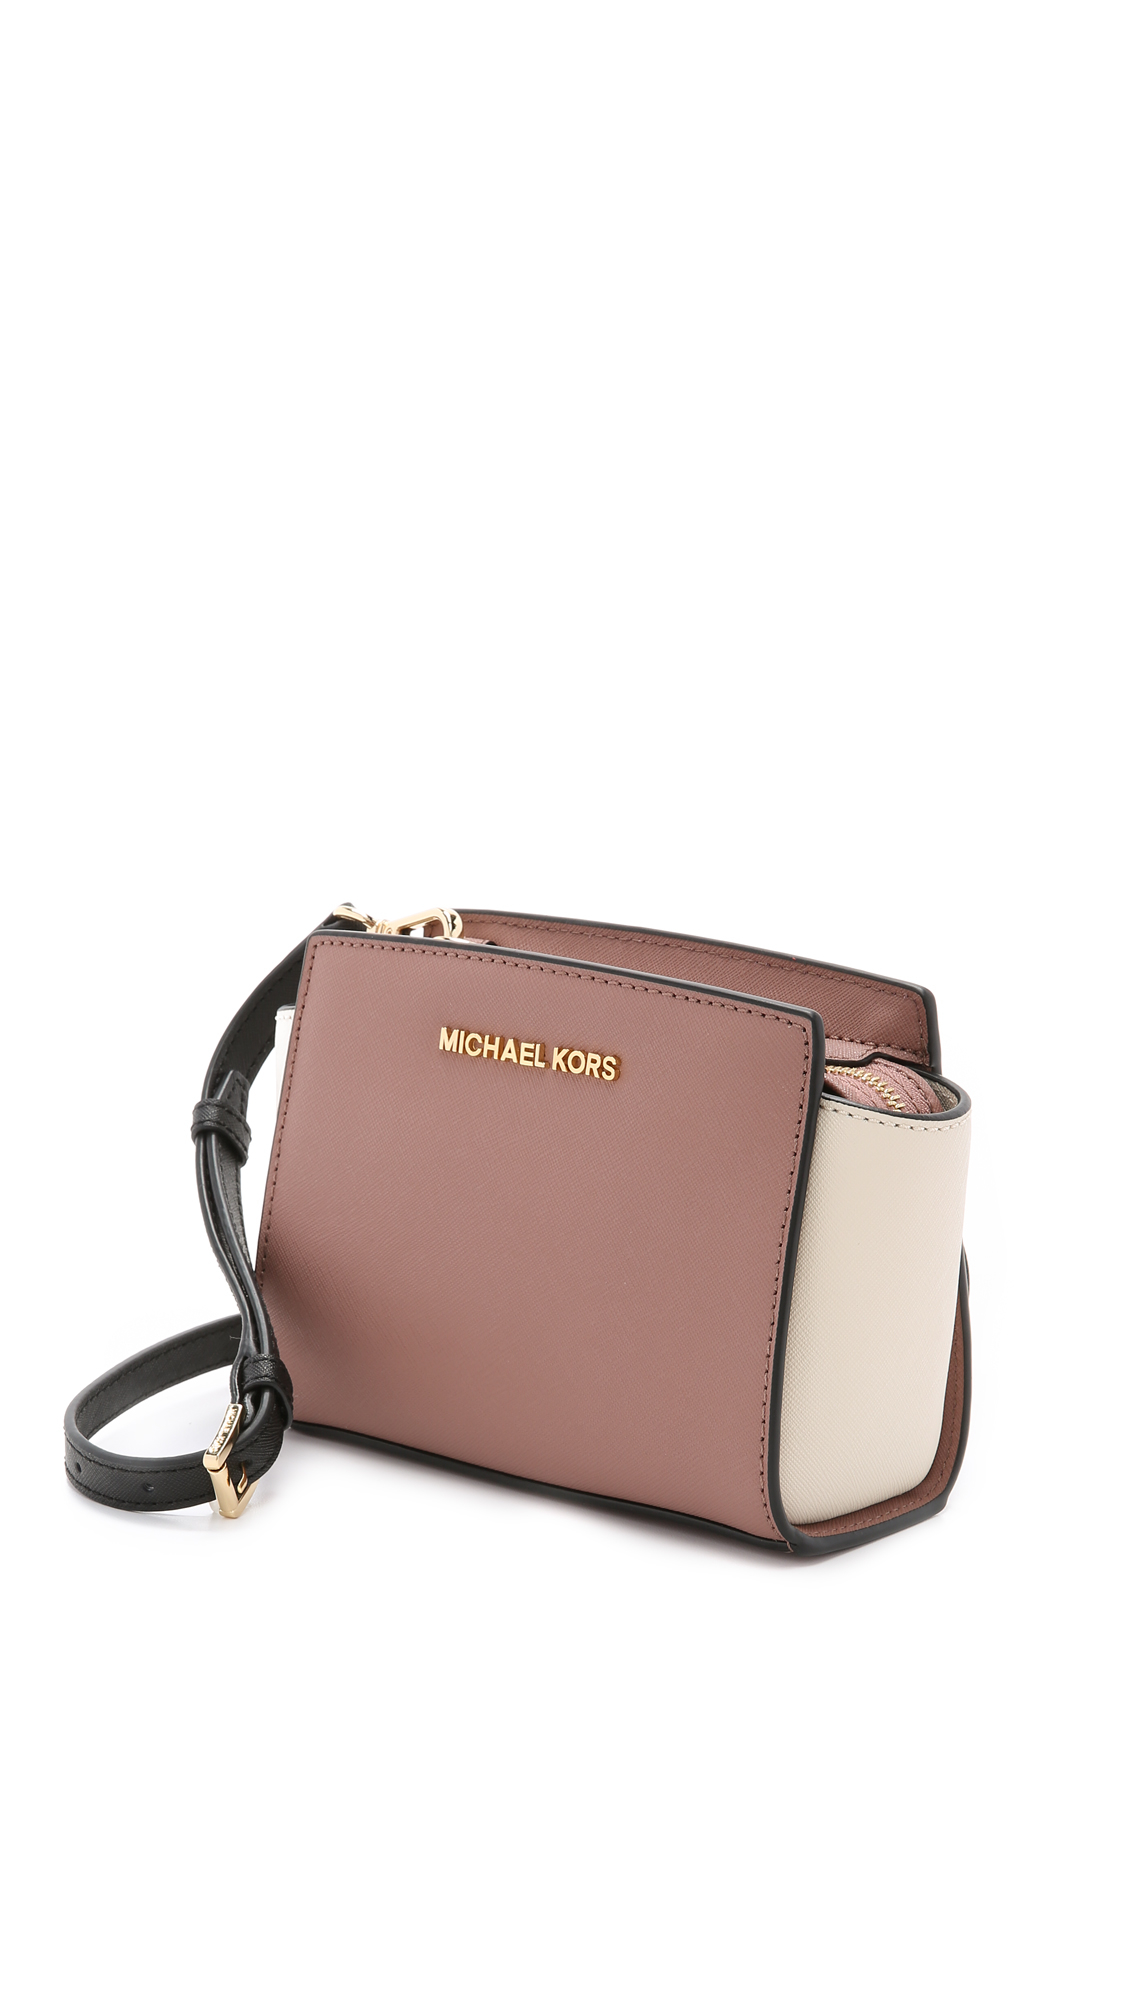 Michael Kors Selma Crossbody Review & whats in my bag with mod